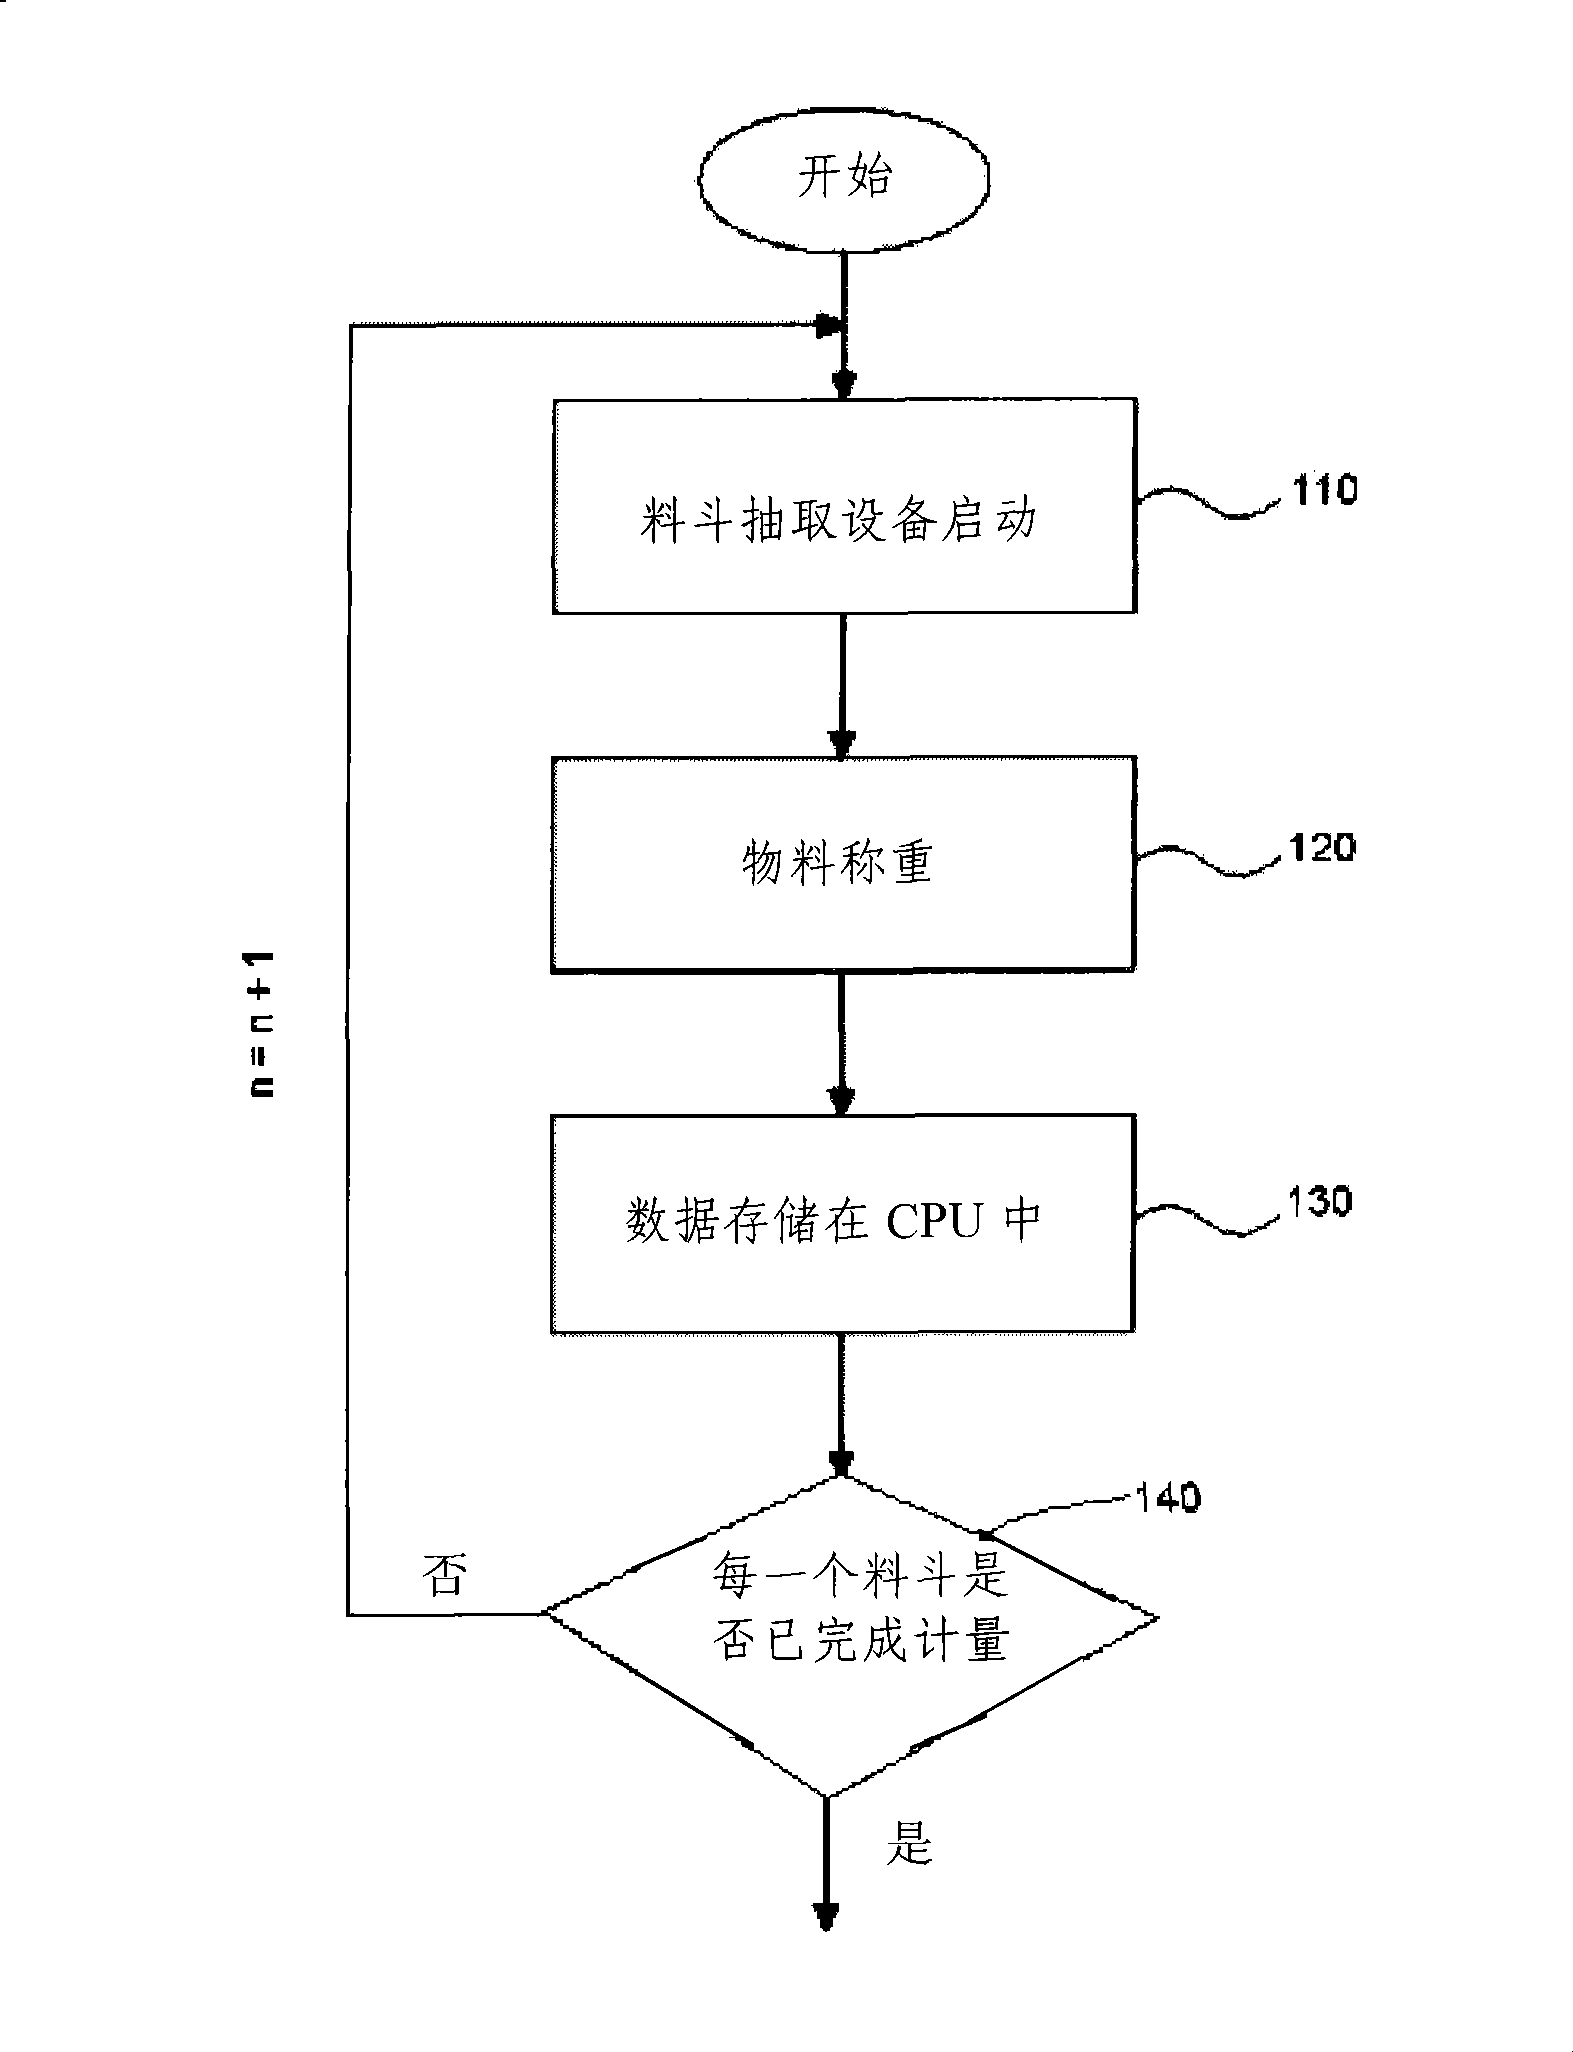 Process and device for processing granular material mixtures